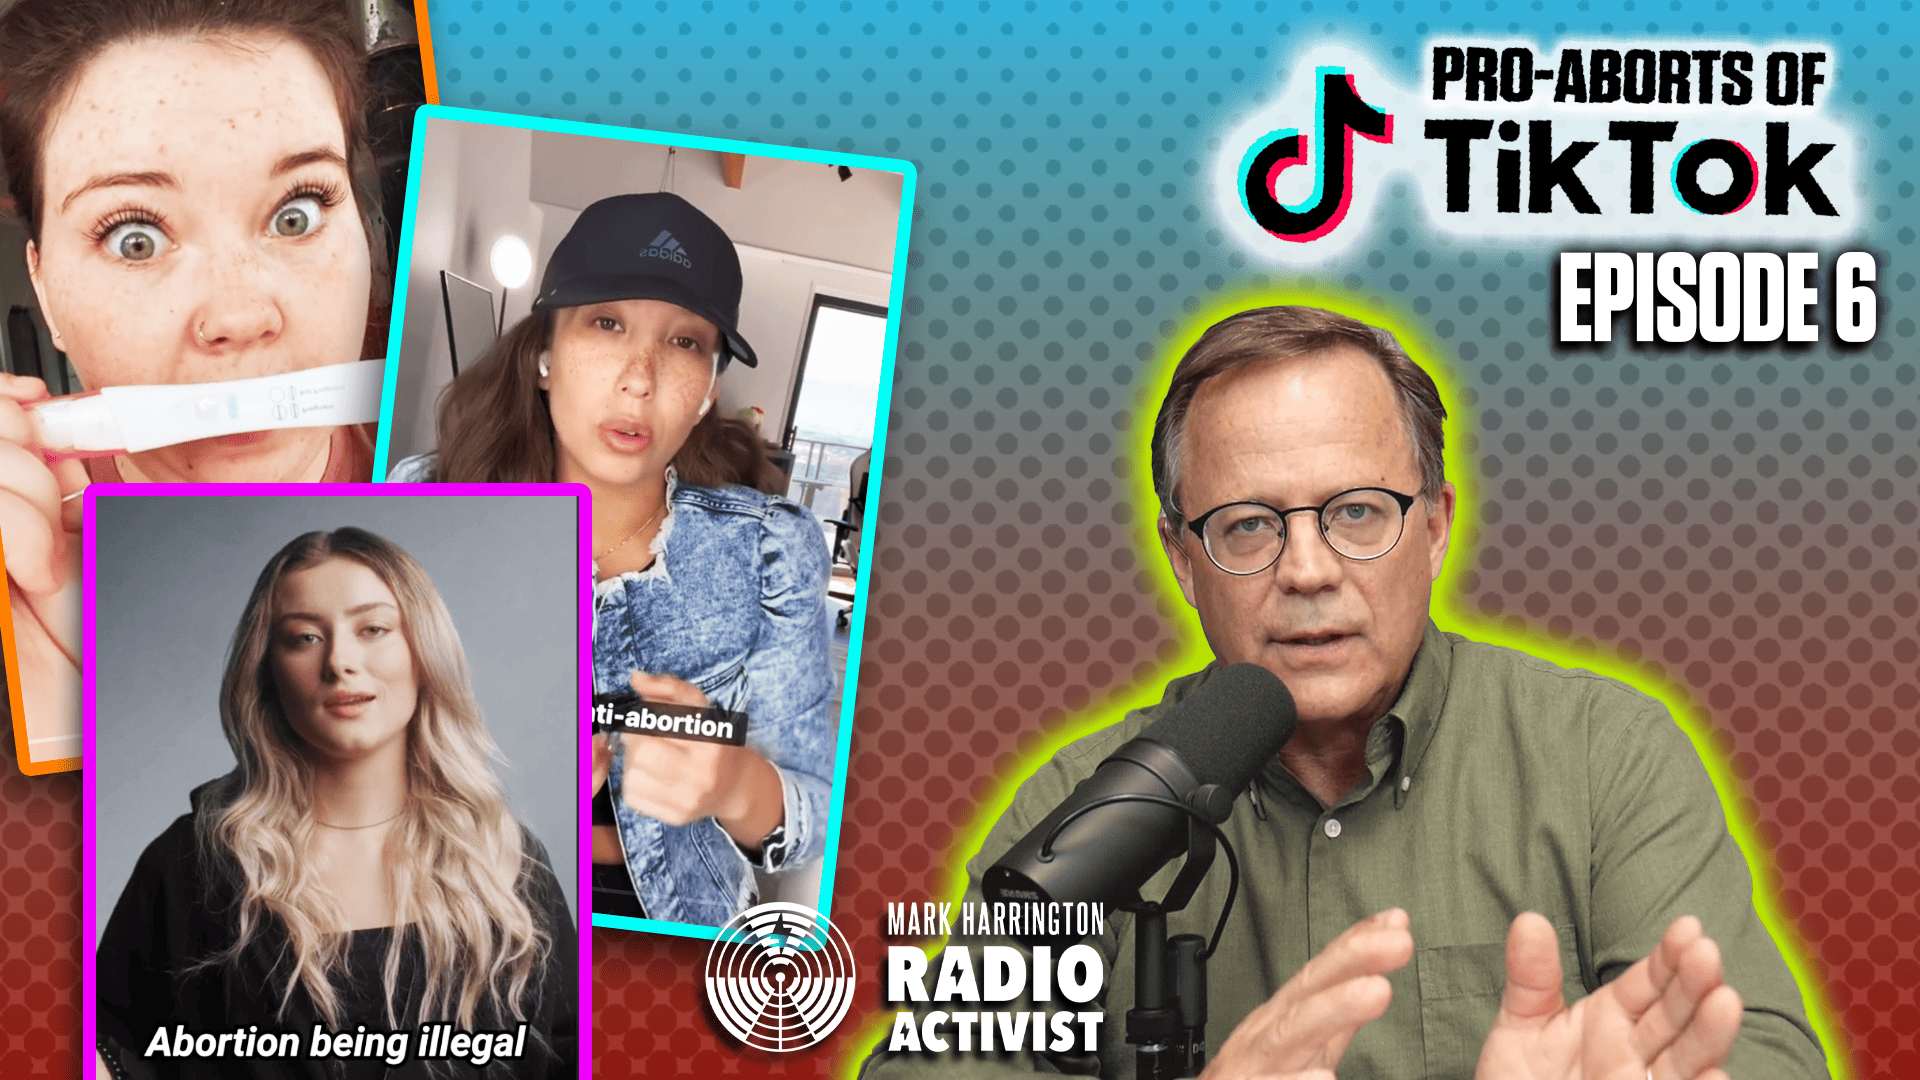 Combating the Abortion Agenda with Satire | Pro-Aborts of TikTok Episode 6